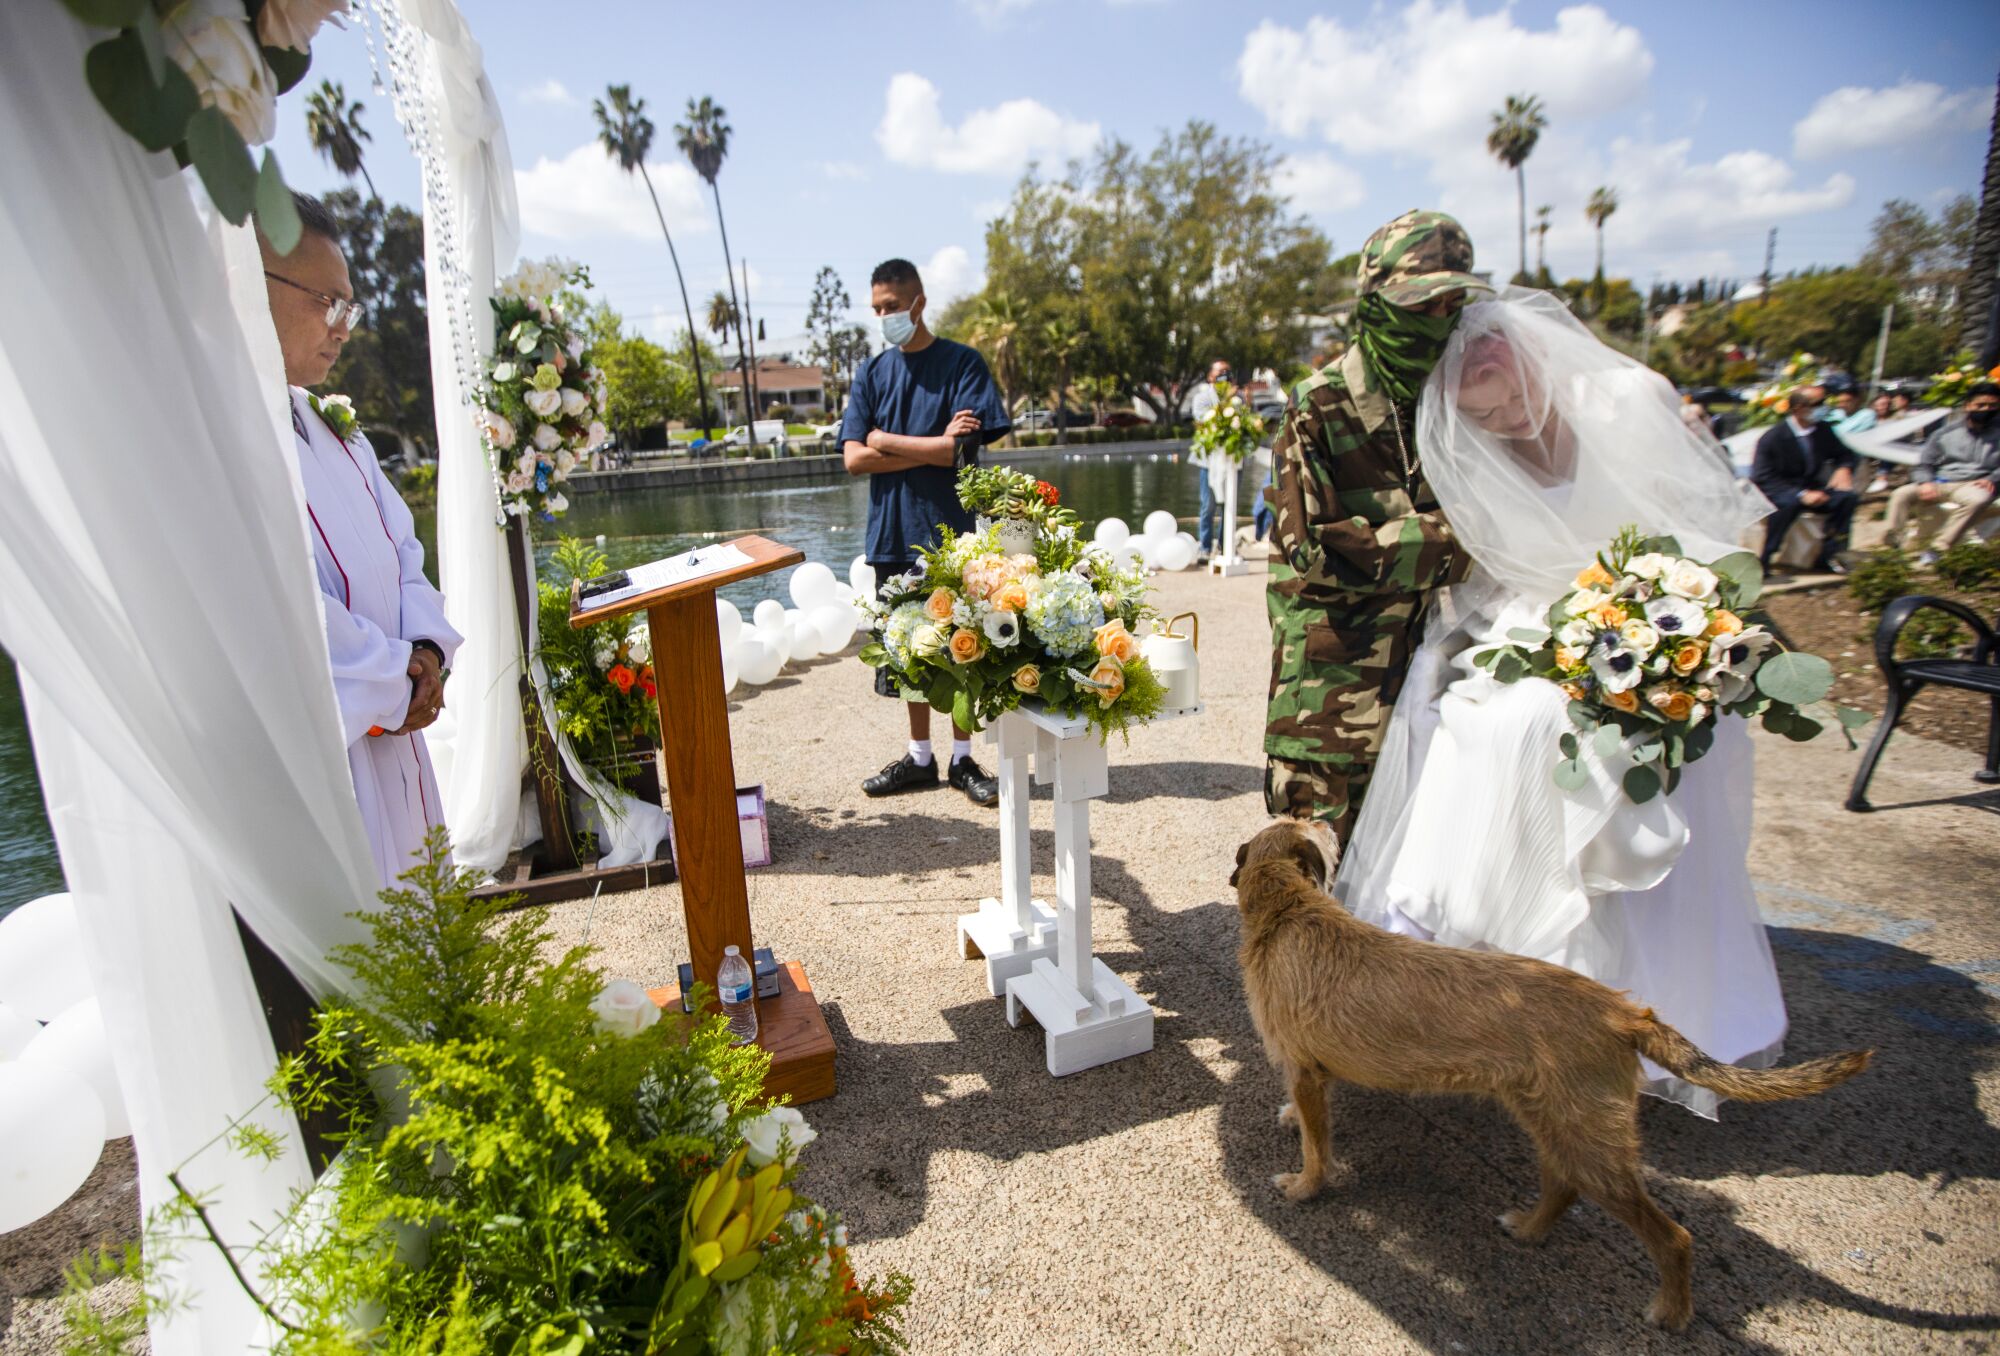 March 20: A homeless couple gets married at the Echo Park encampment with a dog nearby.